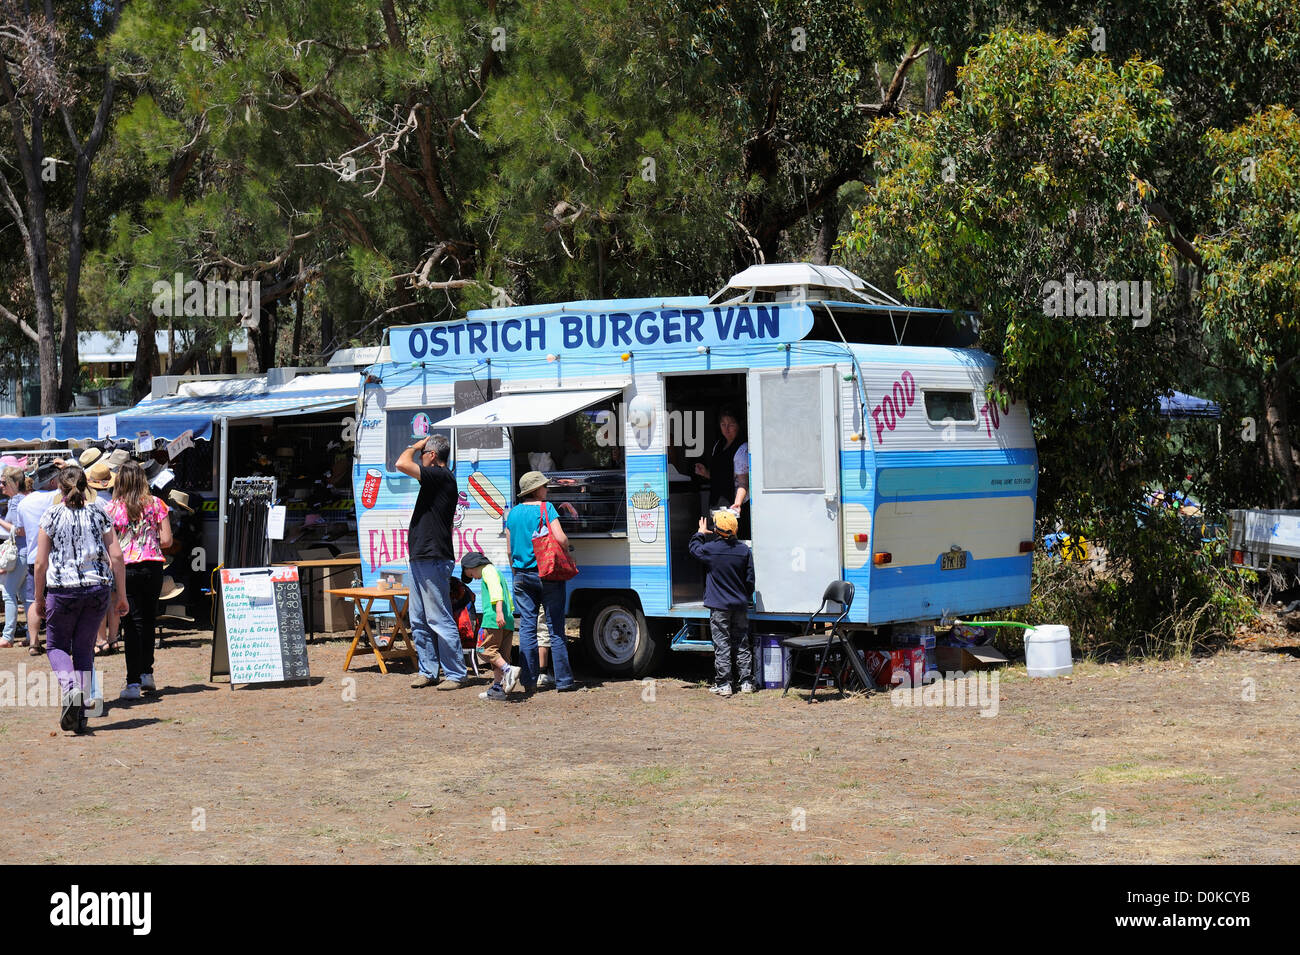 Caravan selling a variety of fast foods, including Ostrich, Emu and Kangaroo burgers, at country agricultural show, Australia Stock Photo